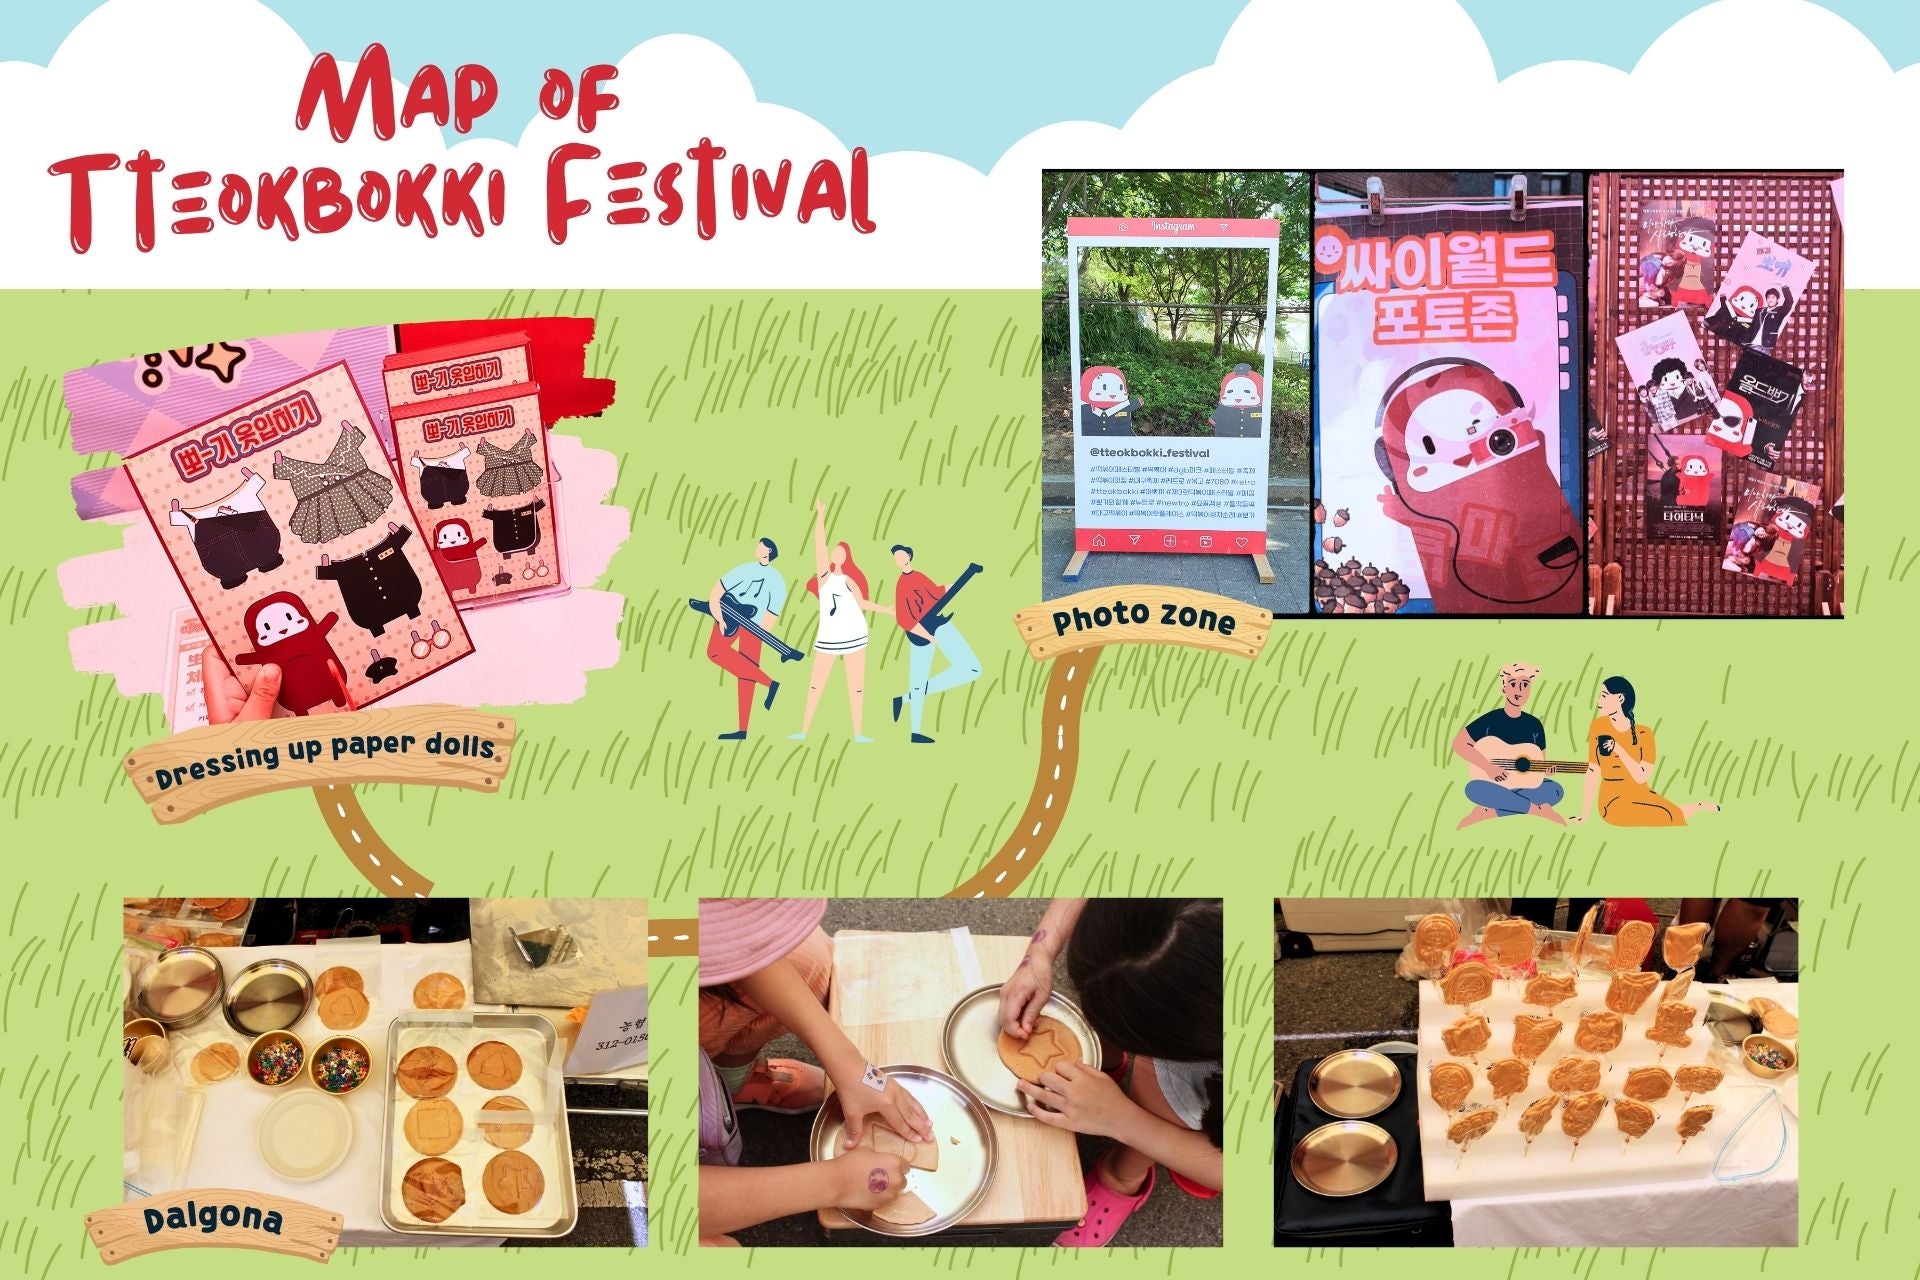 We-invite-you-to-the-world's-best-tteokbokki-festival-in-2023-Part-2-2